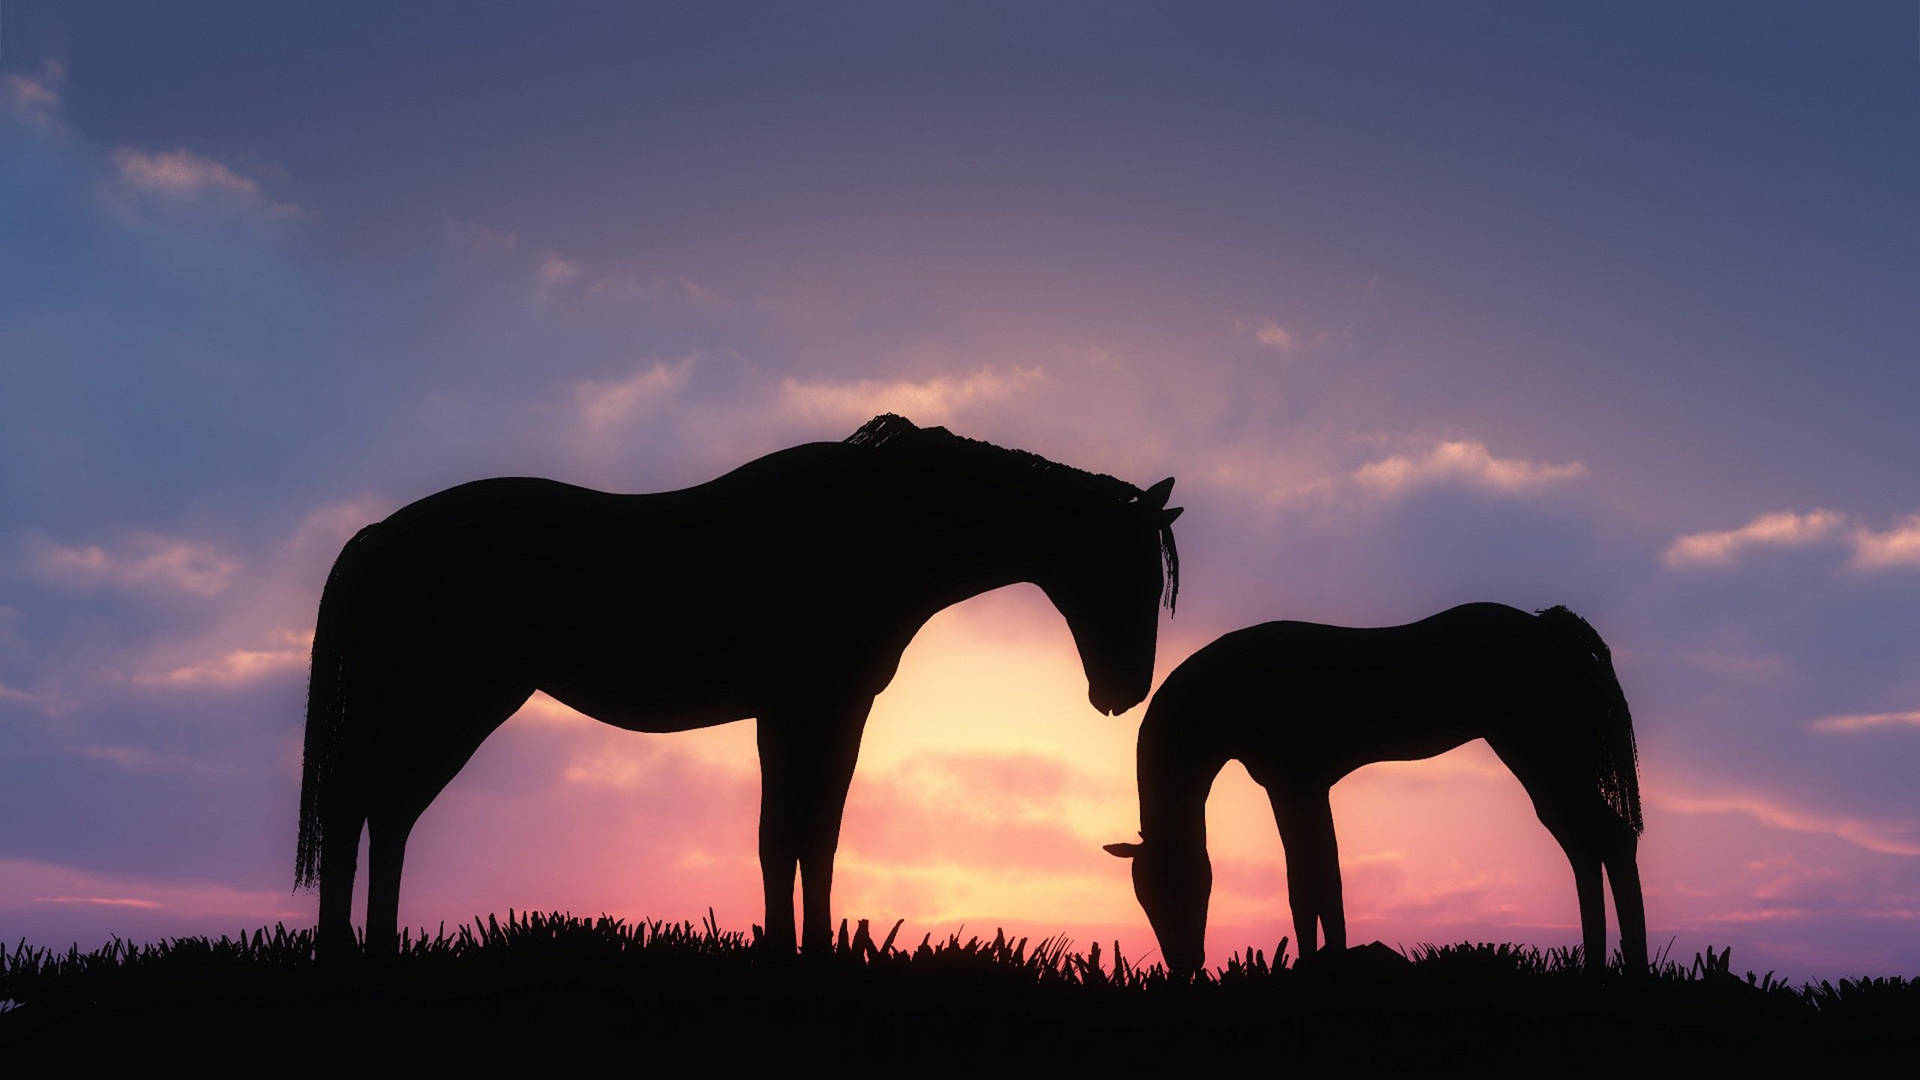 Cute Horse Silhouette By The Sunset